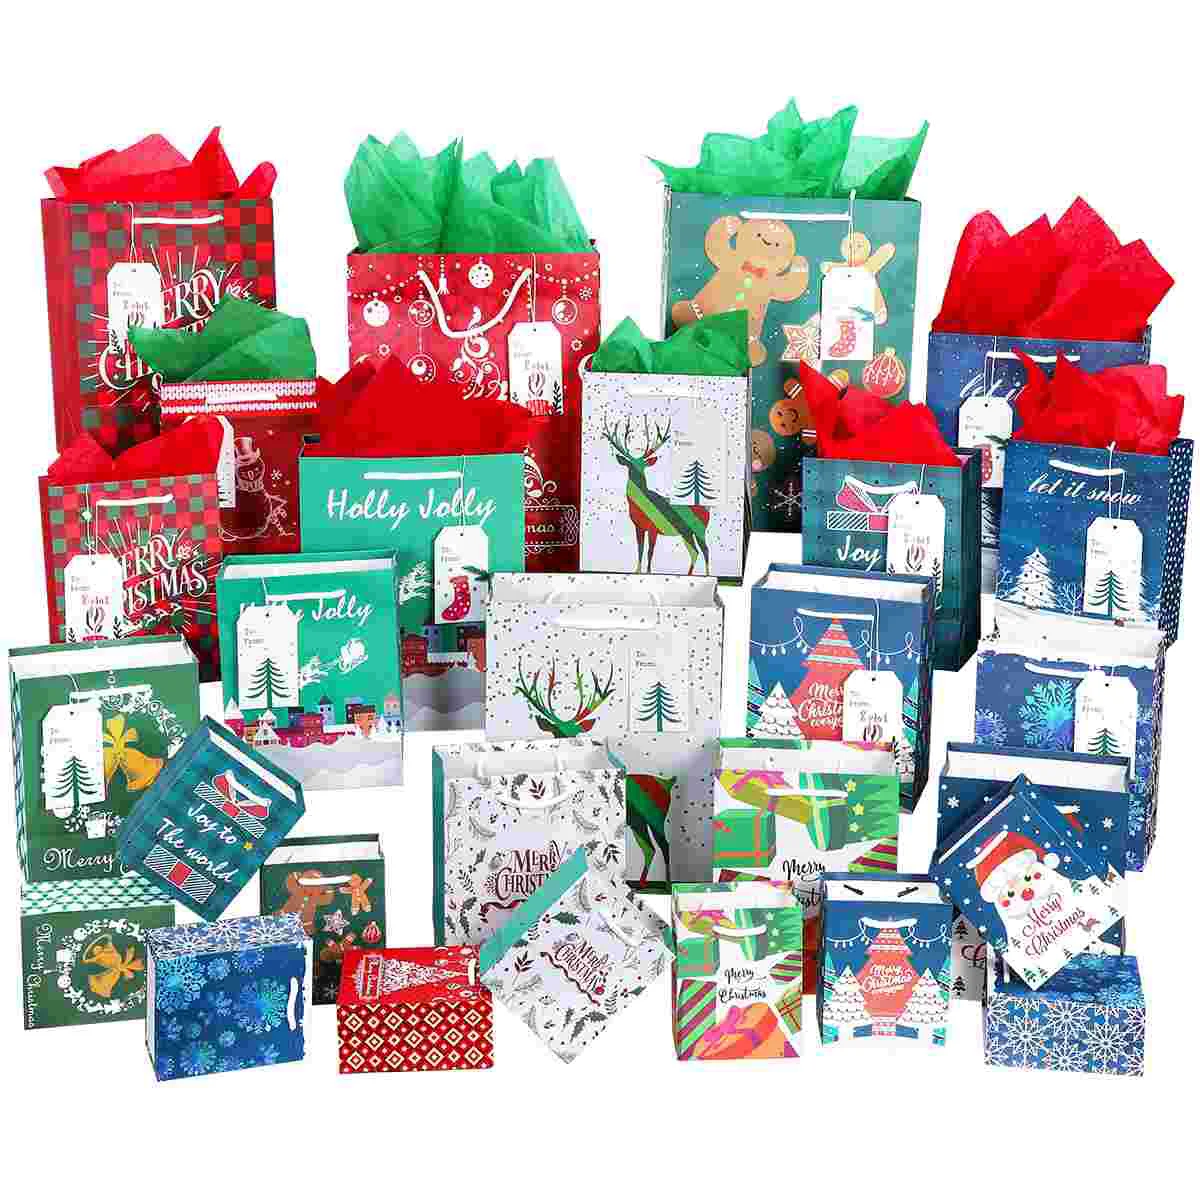 

UNOMOR 28PCS Christmas Gift Bags Treat Bags Gift Wrapping Bags Candy Party Favor Goody Bags Christmas Party Supplies with 28PCS